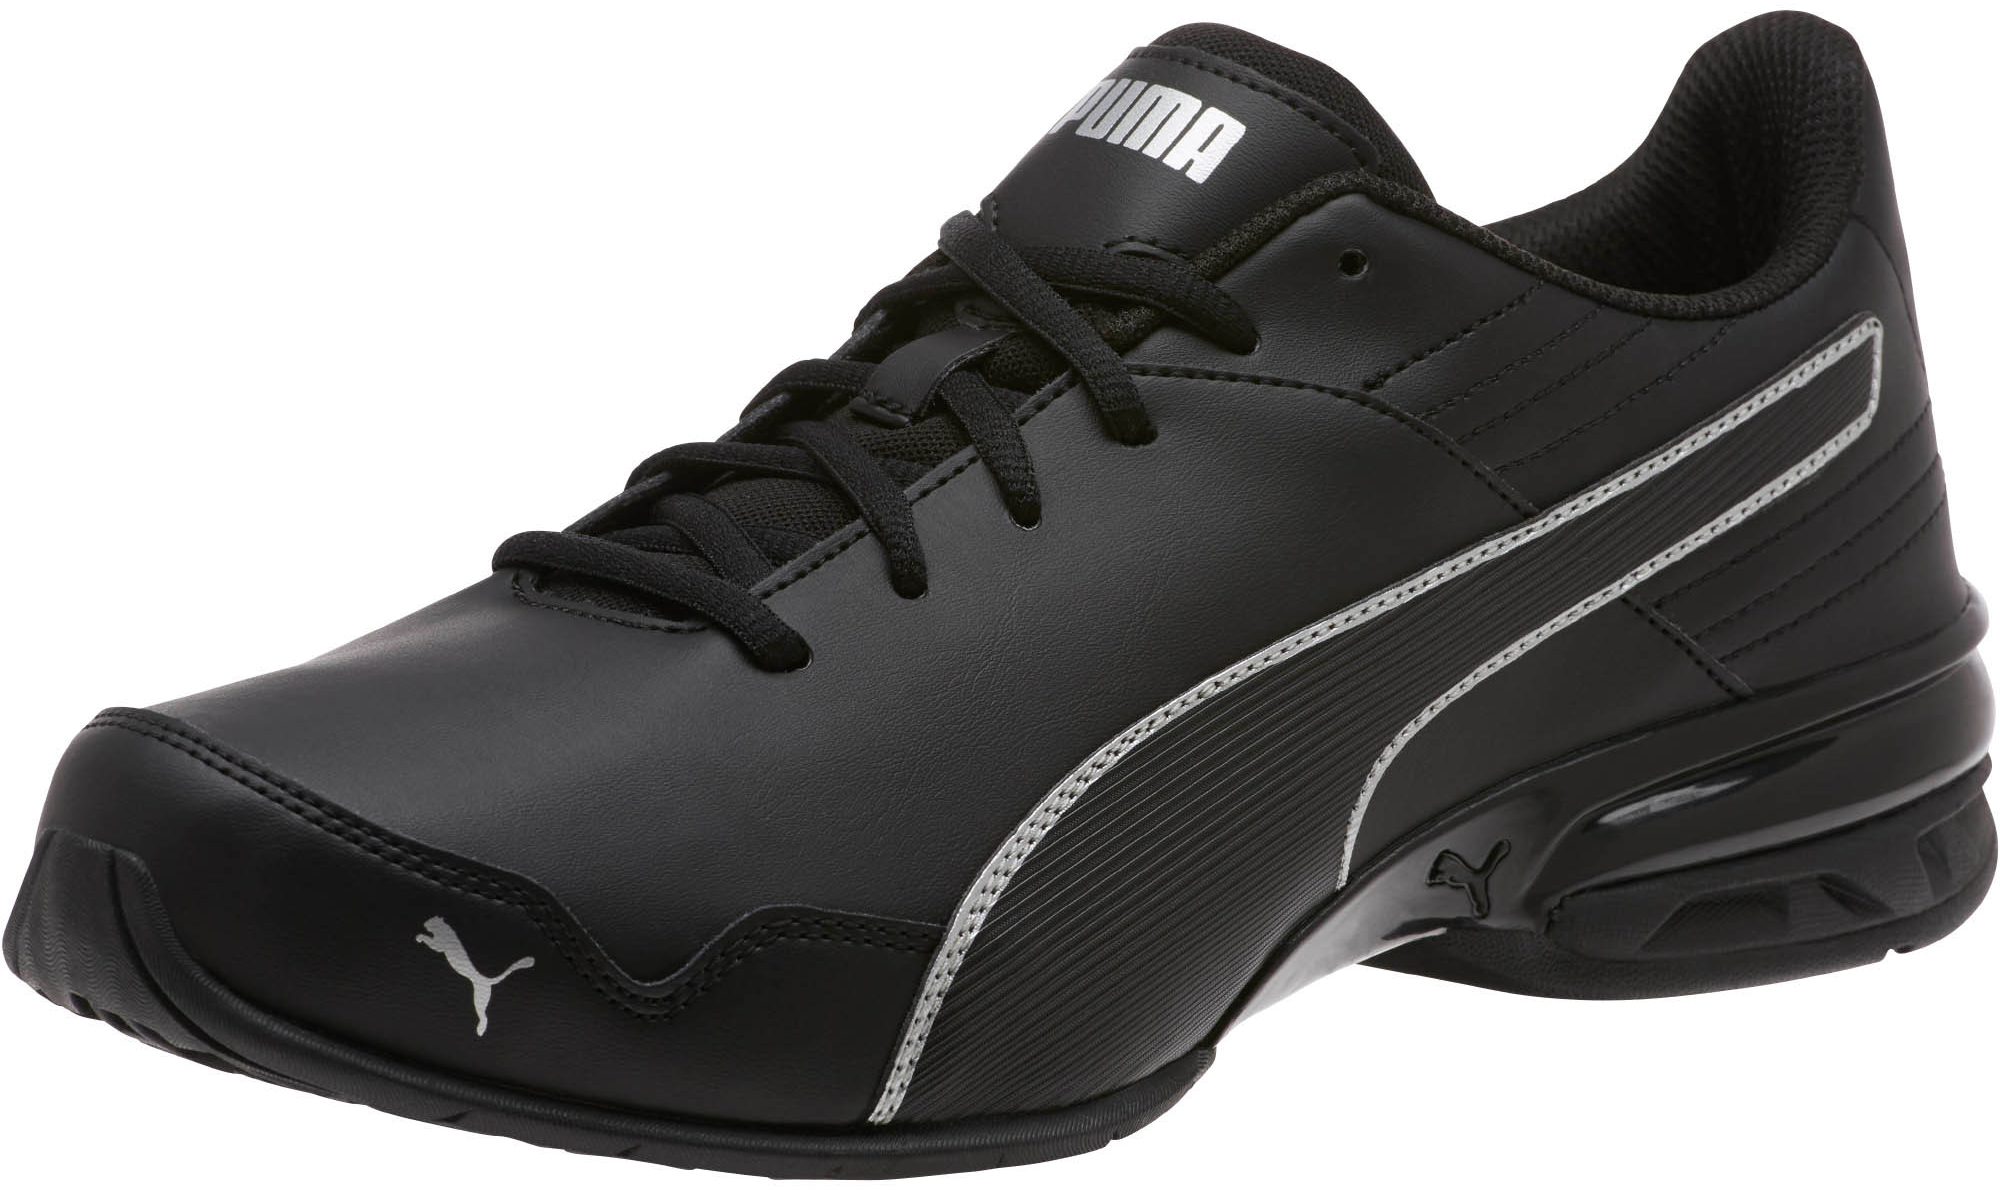 Up to 75% Off PUMA Shoes & Apparel + Free Shipping